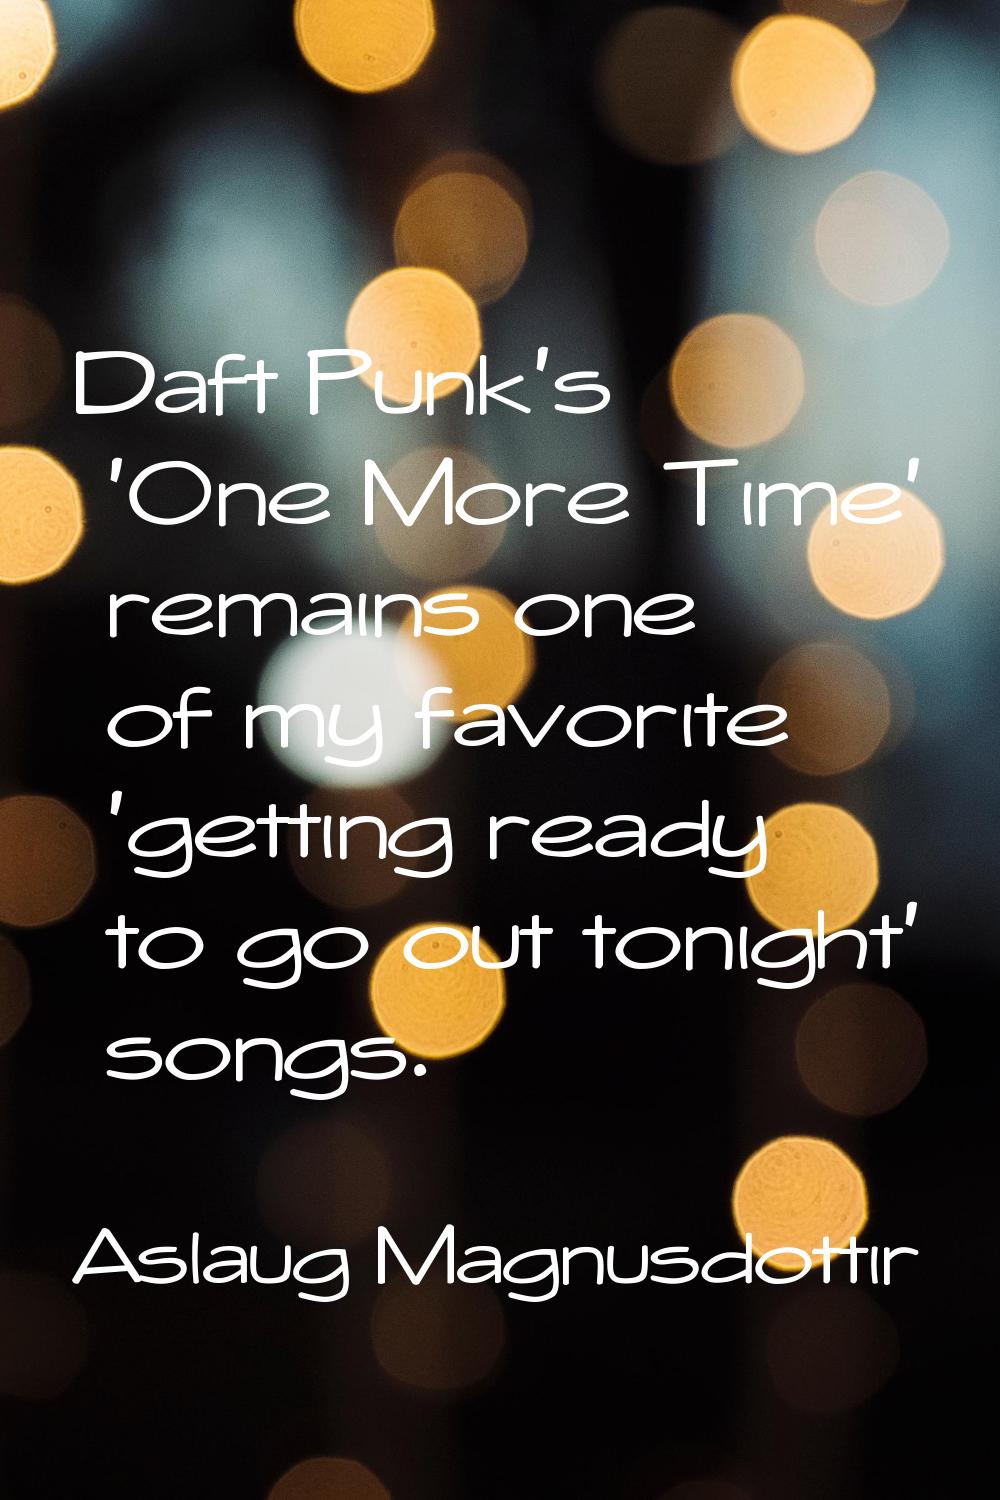 Daft Punk's 'One More Time' remains one of my favorite 'getting ready to go out tonight' songs.